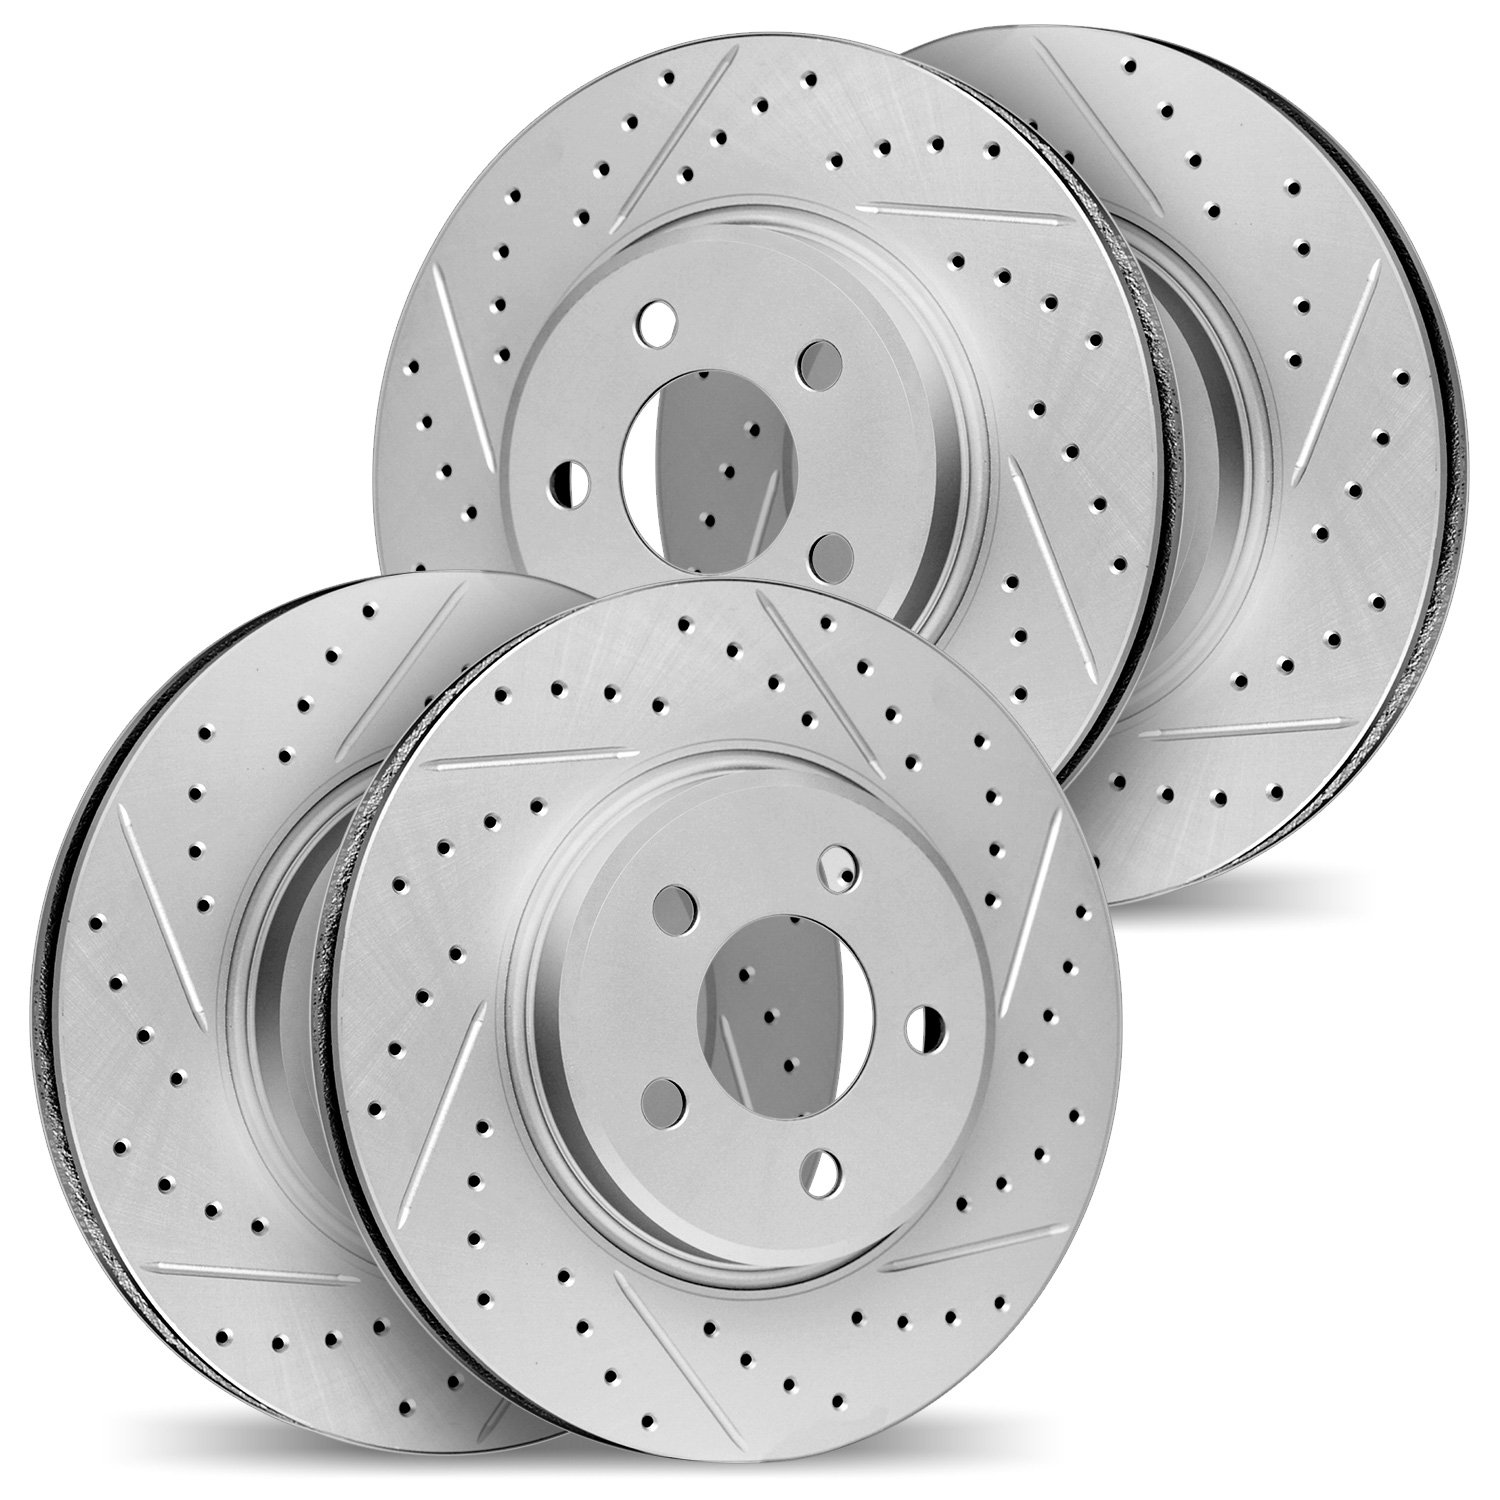 2004-27028 Geoperformance Drilled/Slotted Brake Rotors, 2010-2016 Volvo, Position: Front and Rear